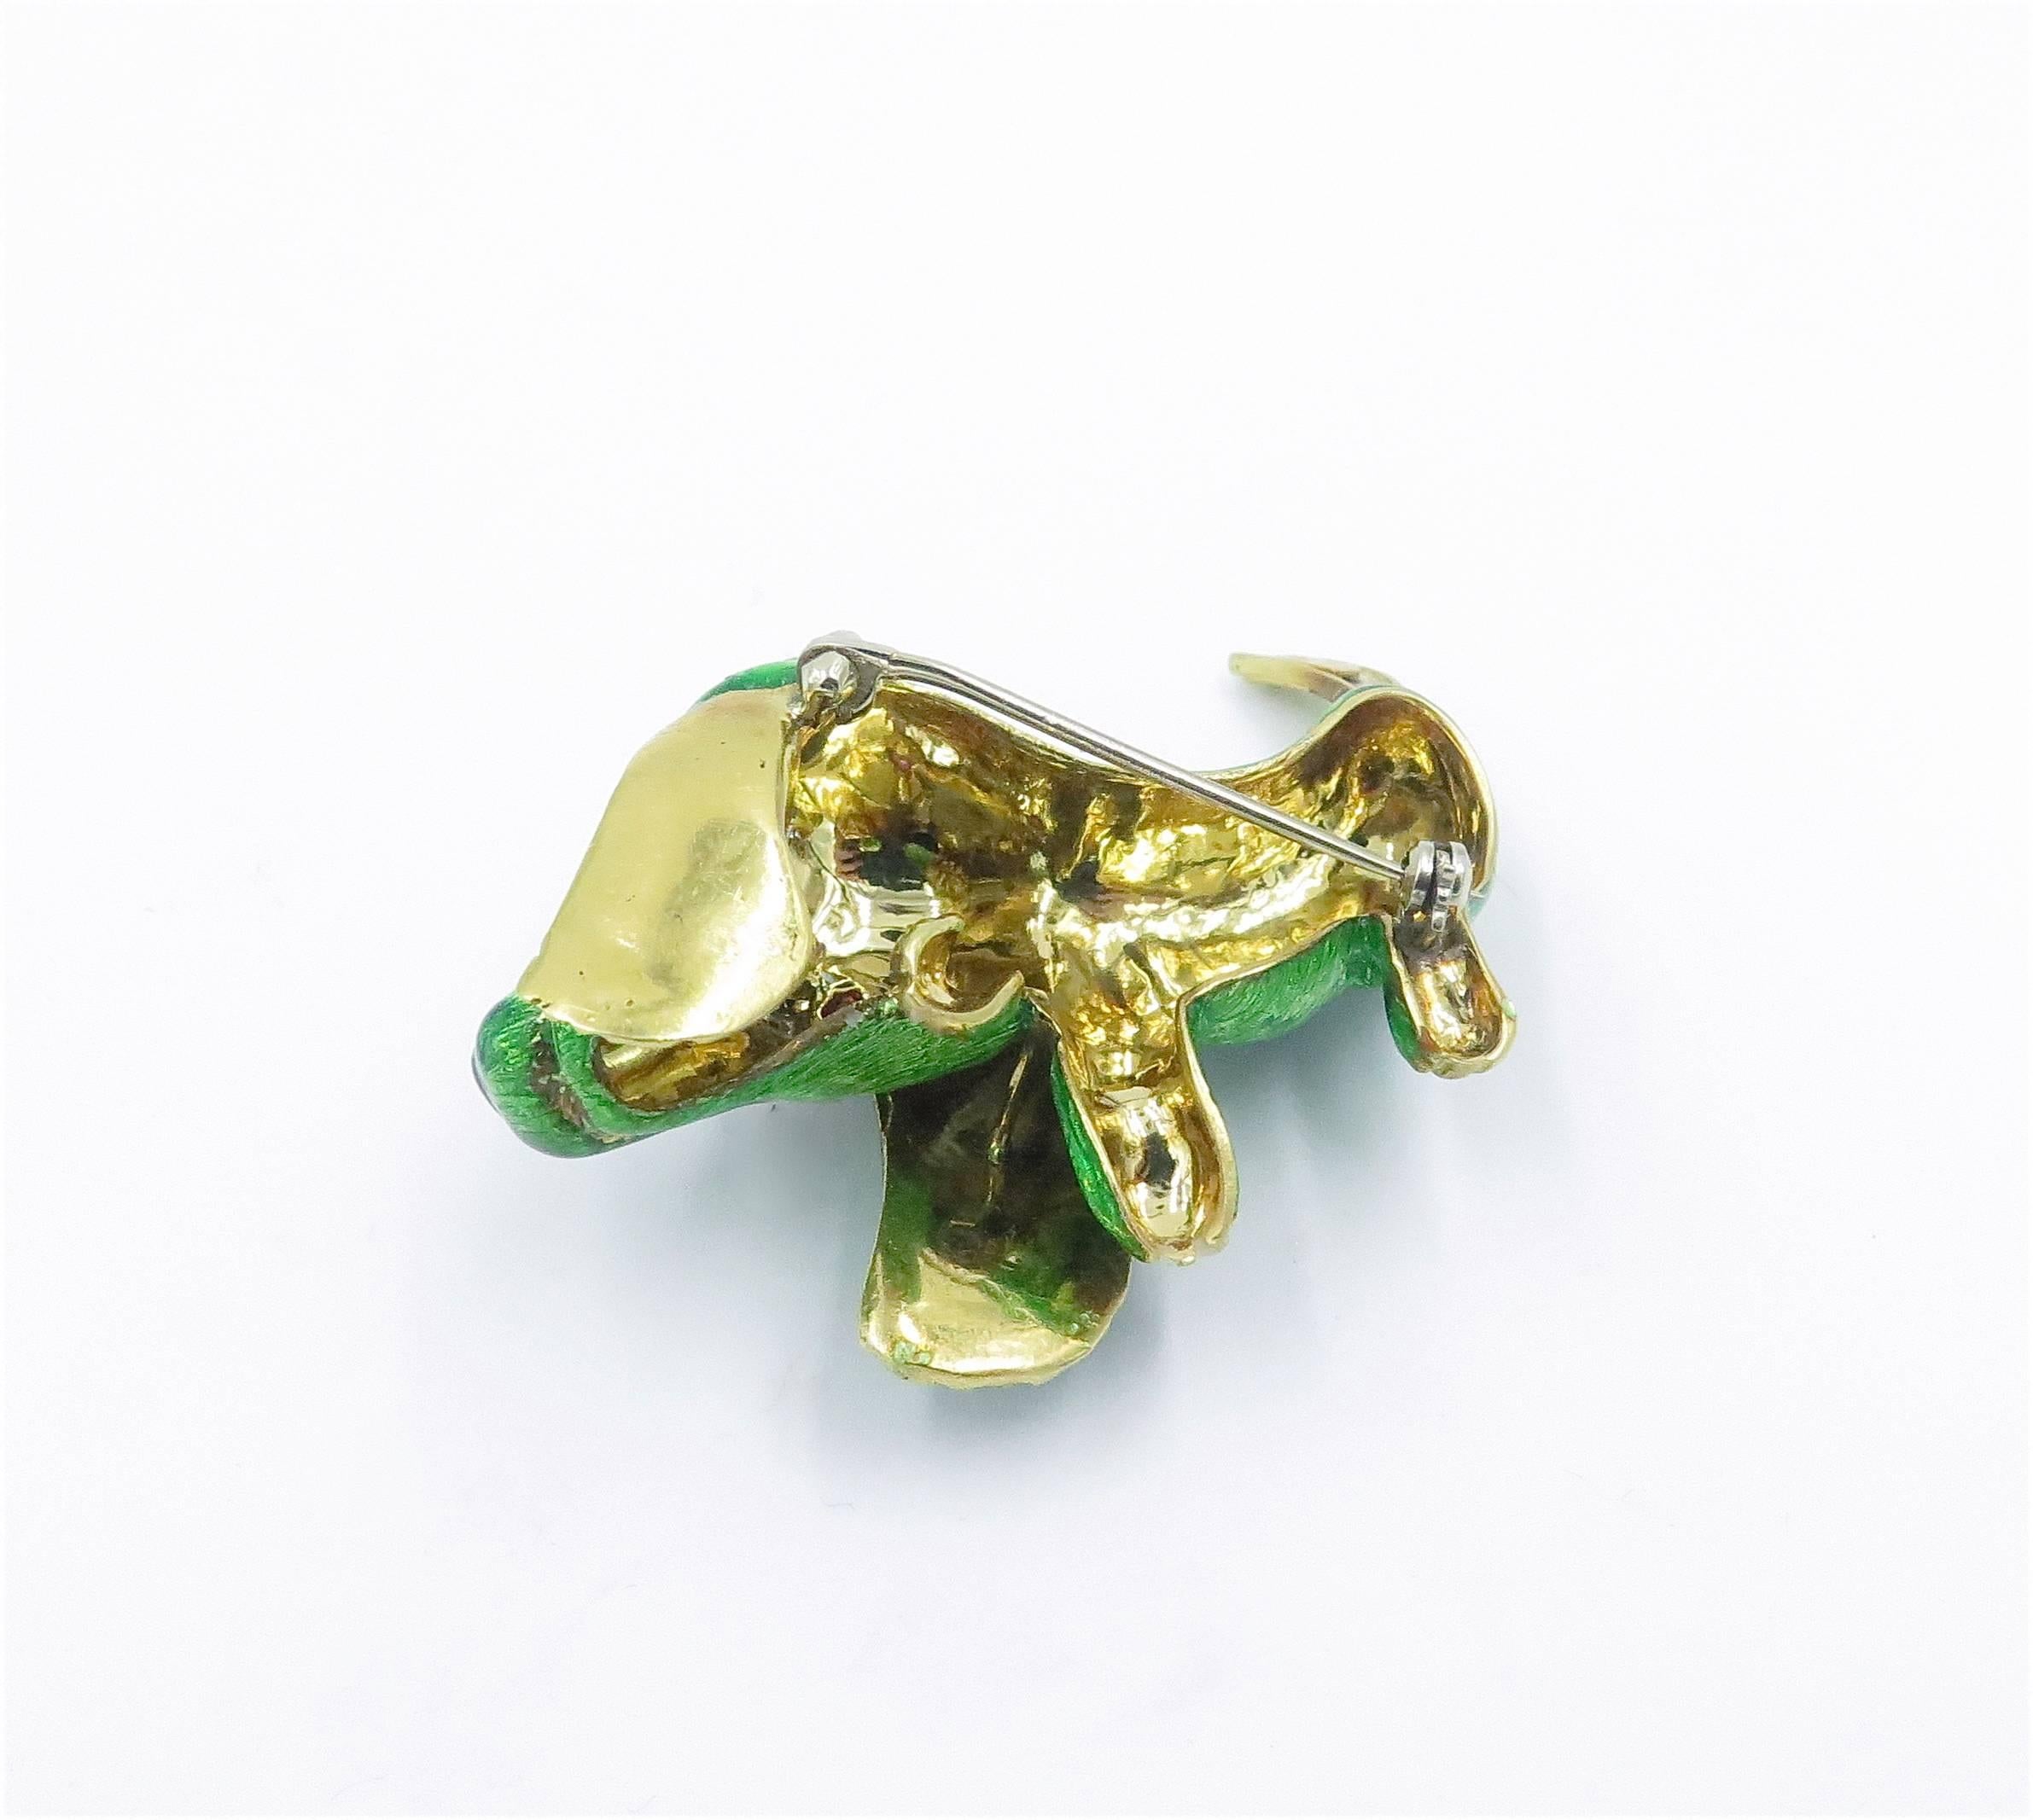 An 18 karat yellow gold, enamel, ruby and diamond dog brooch. Circa 1960. Designed as a stylized green enamel dachshund, enhanced by a marquise-cut ruby eye, with circular-cut diamond detail. Length is approximately 2 1/4 inches.  Gross weight